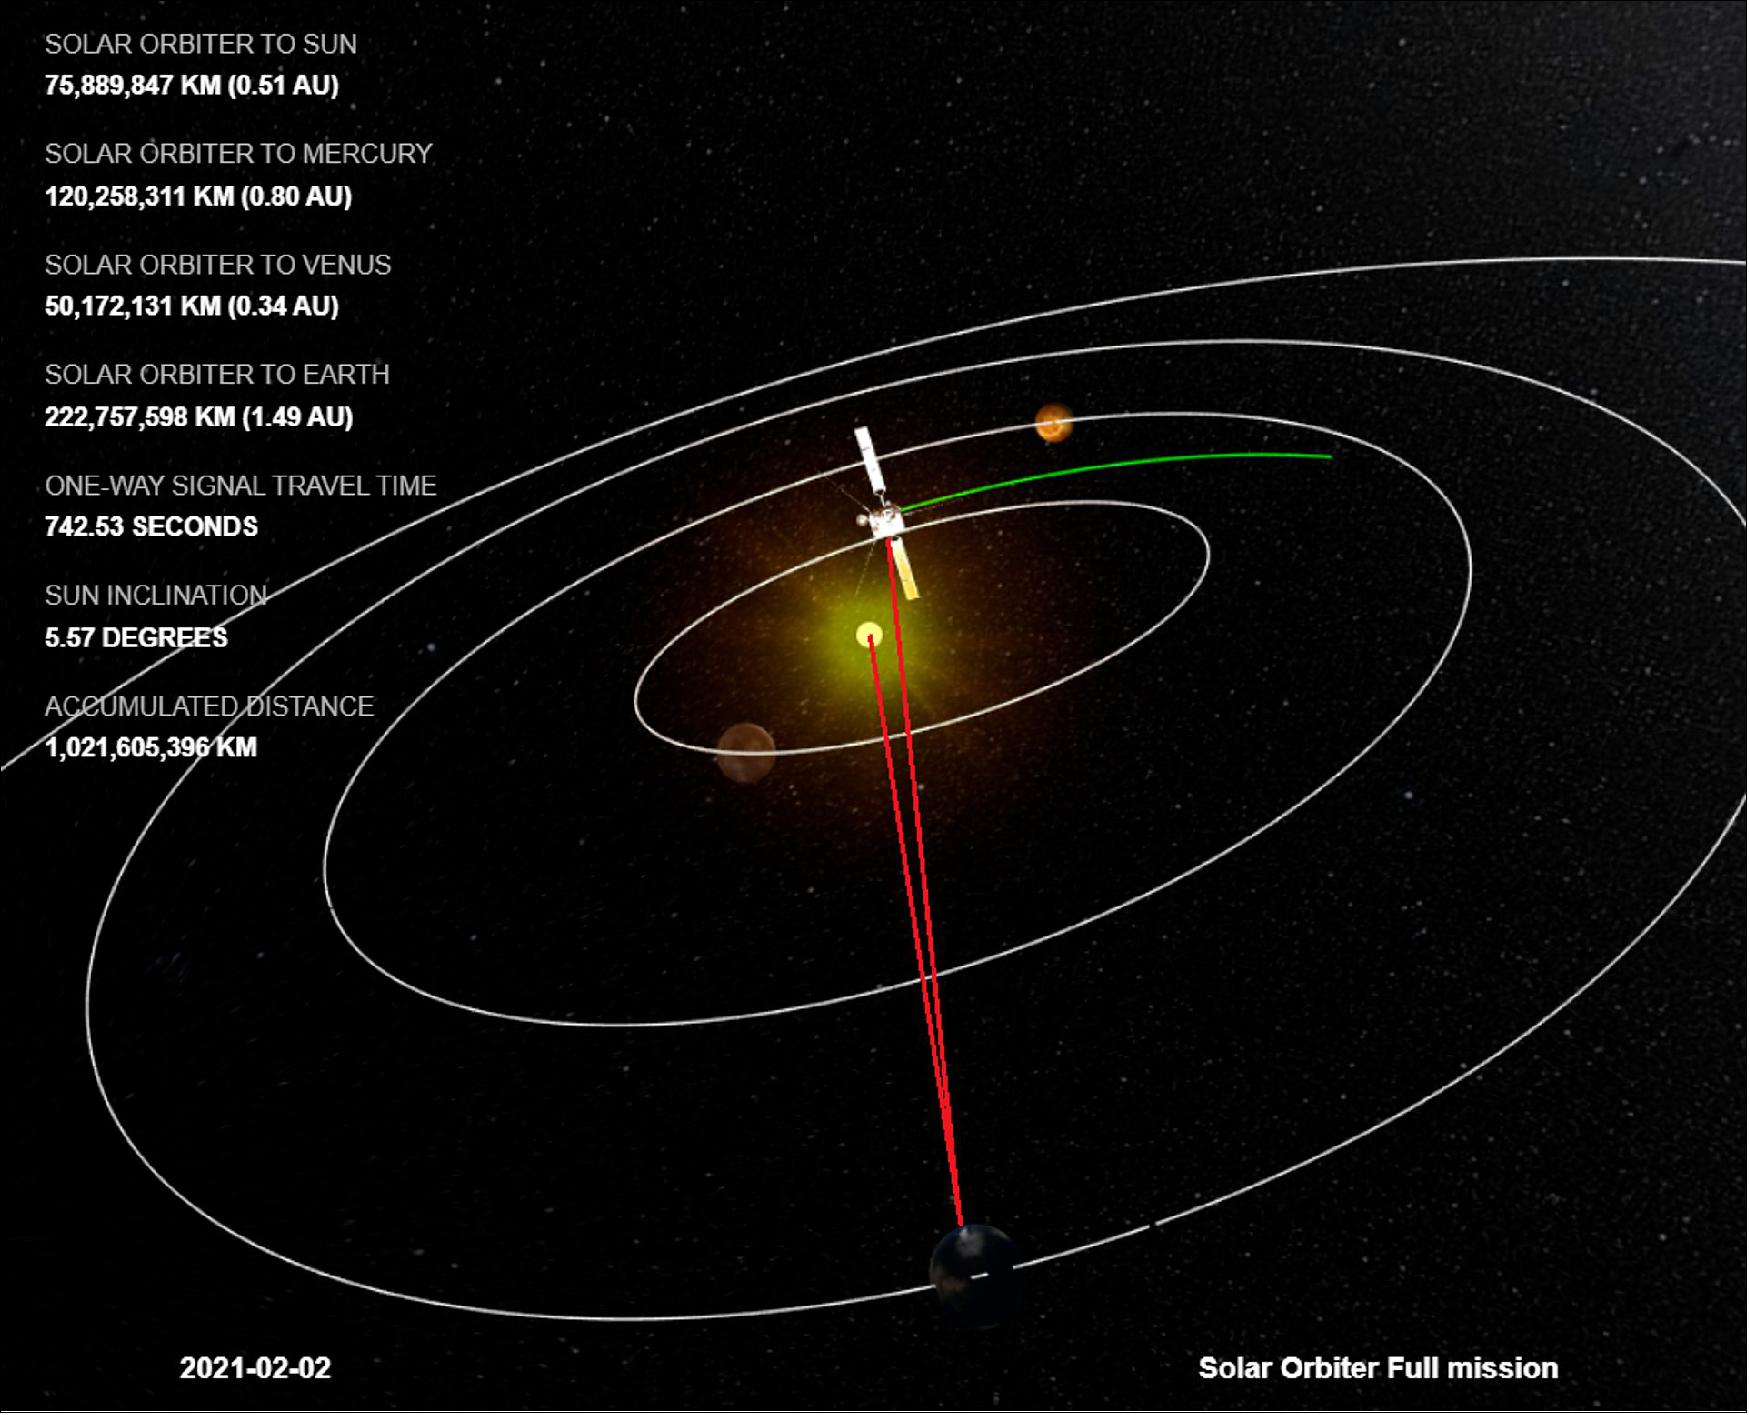 Figure 57: Solar Orbiter ducks behind the Sun. A visualization showing how the trajectory of Solar Orbiter takes it within 5° of the Sun, as seen from Earth (indicated with red lines). This marks the start of Solar conjunction, lasting from about 29 January until about 14 February 2021. In the image, the Sun is shown much, much smaller than it should be so as to not cover up the spacecraft. Earth is the dark blue orb in the foreground. You can spot Solar Orbiter at any point in its journey via ESA's Where is Solar Orbiter? visualization tool: https://solarorbiter.esac.esa.int/where/ (image credit: ESA)